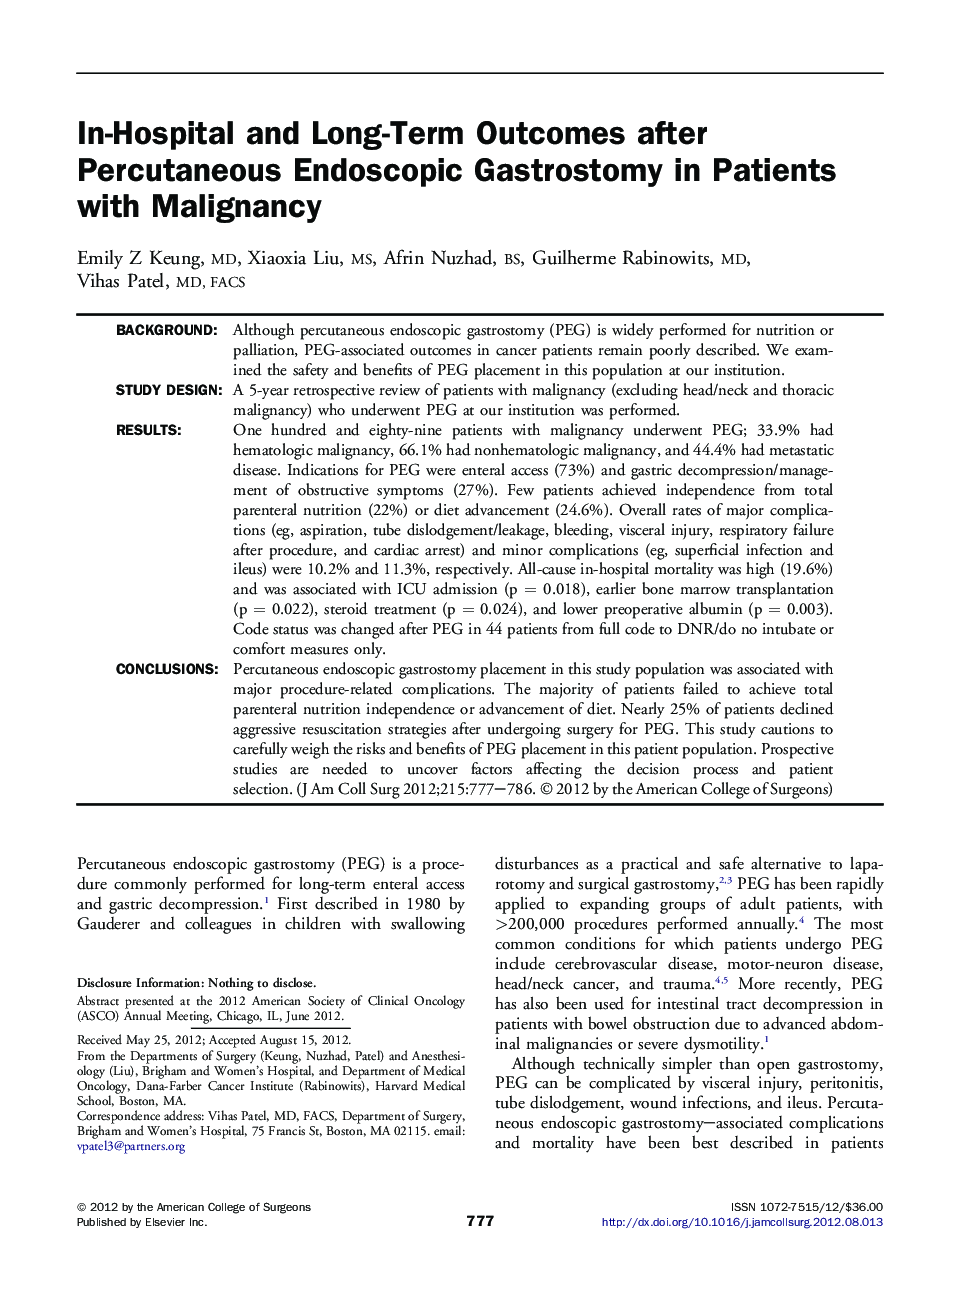 In-Hospital and Long-Term Outcomes after Percutaneous Endoscopic Gastrostomy in Patients with Malignancy 